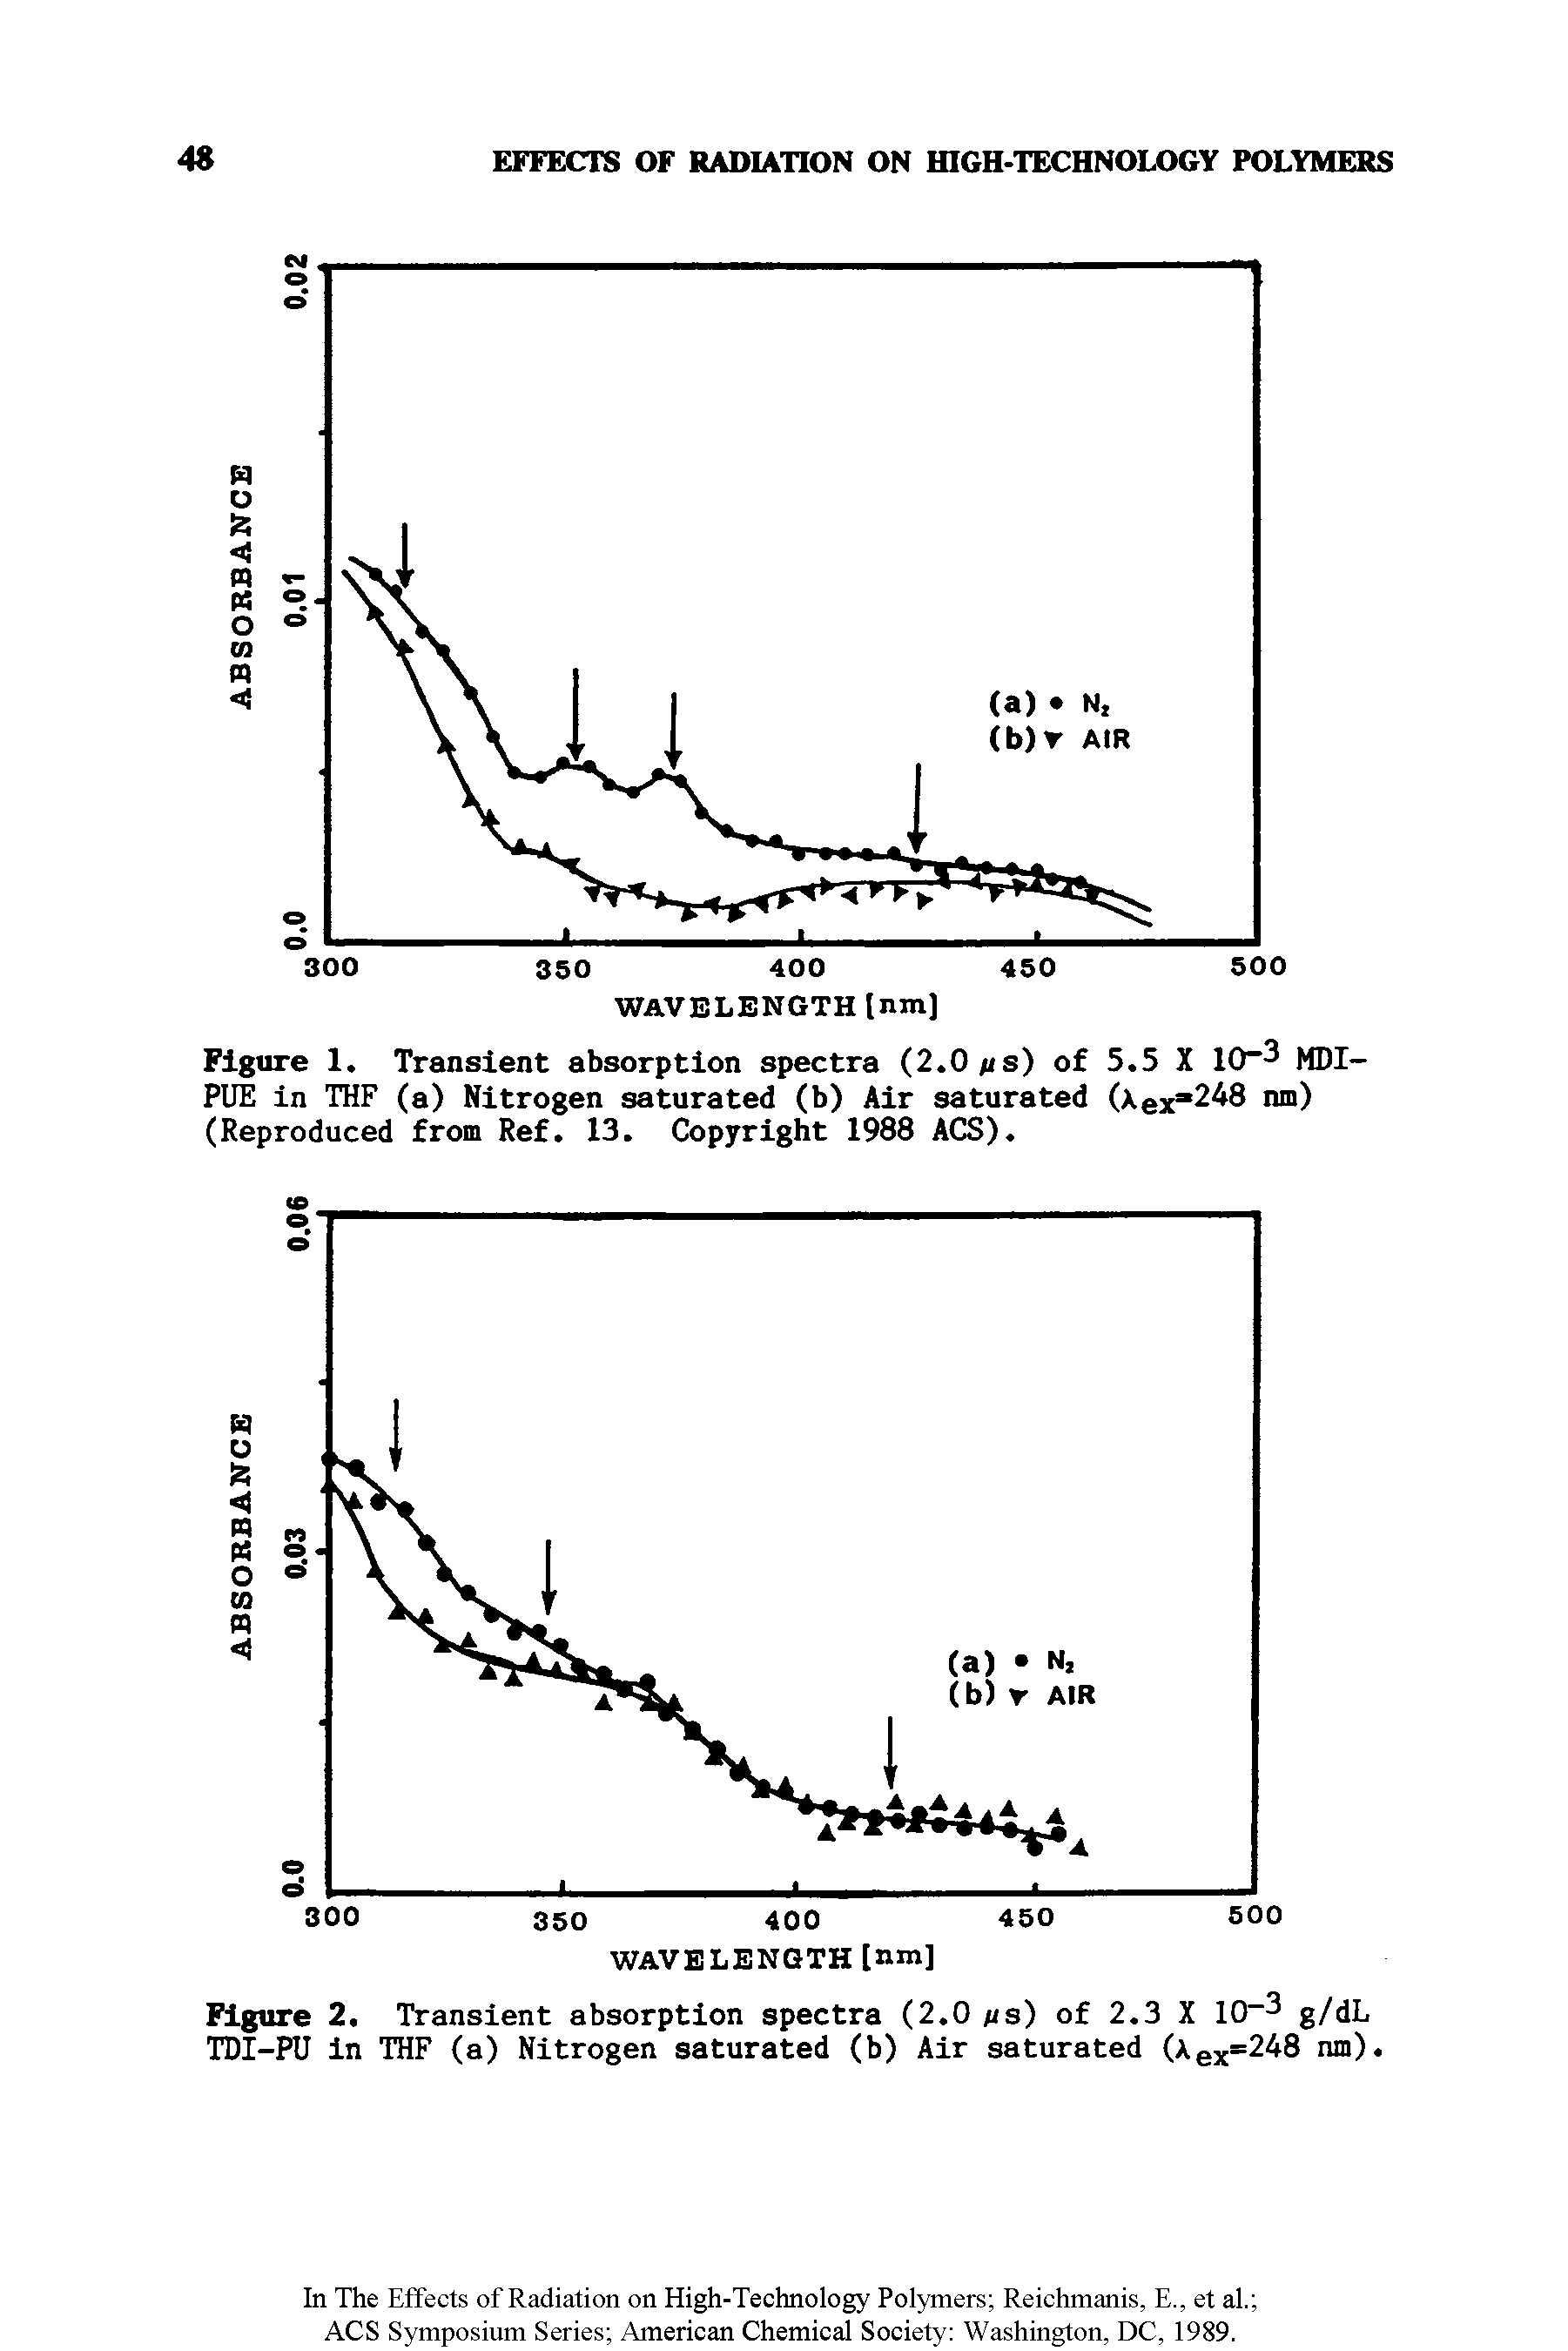 Figure 1. Transient absorption spectra (2.0 ms) of 5.5 X 10 3 MDI-PUE in THF (a) Nitrogen saturated (b) Air saturated (xex 248 nm) (Reproduced from Ref. 13. Copyright 1988 ACS).